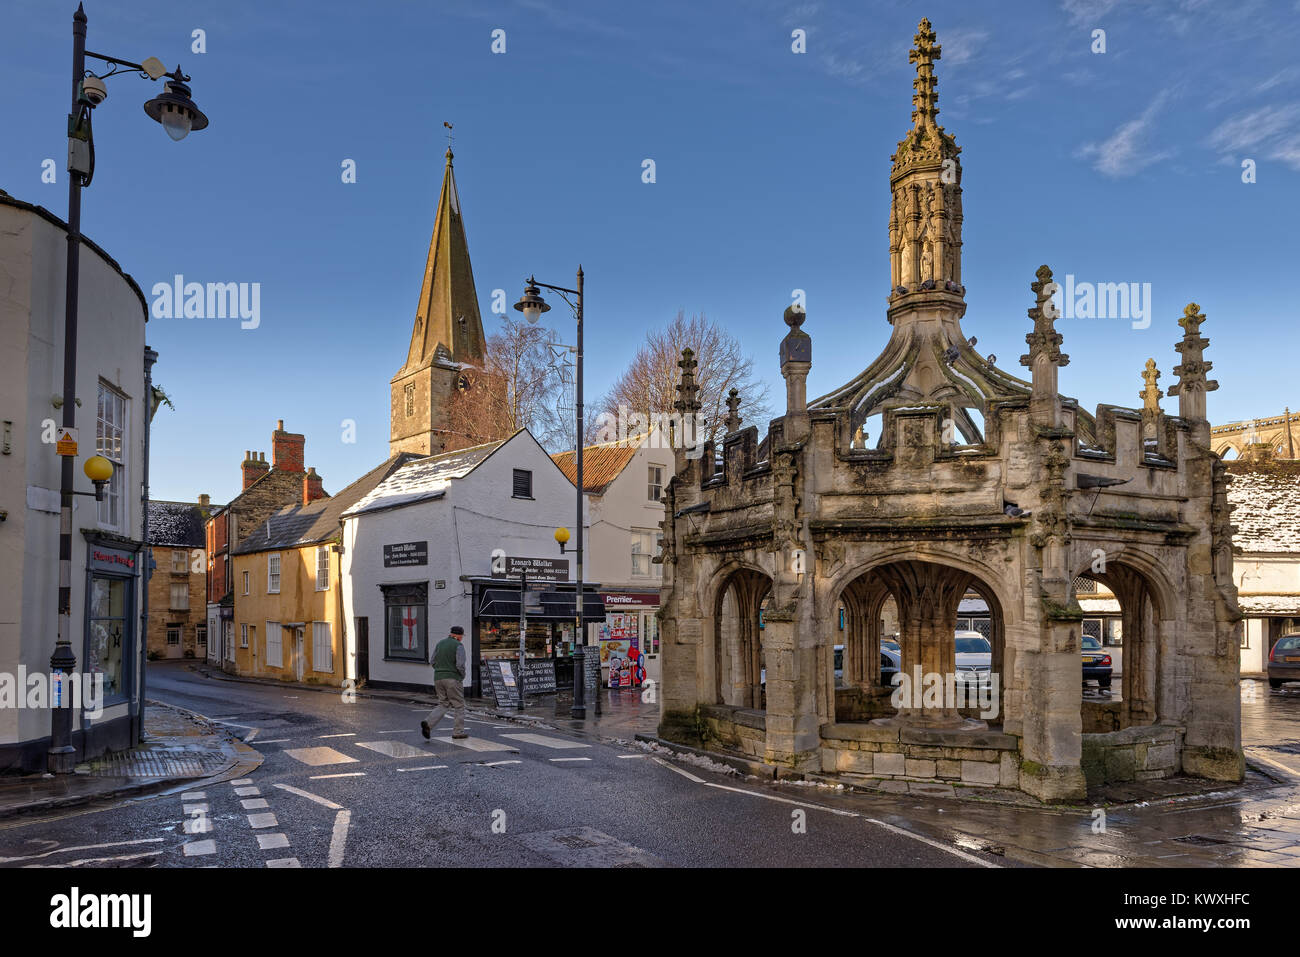 The Market Cross is a Grade 1 listed building and the focal point of the Wiltshire town of Malmesbury. Stock Photo